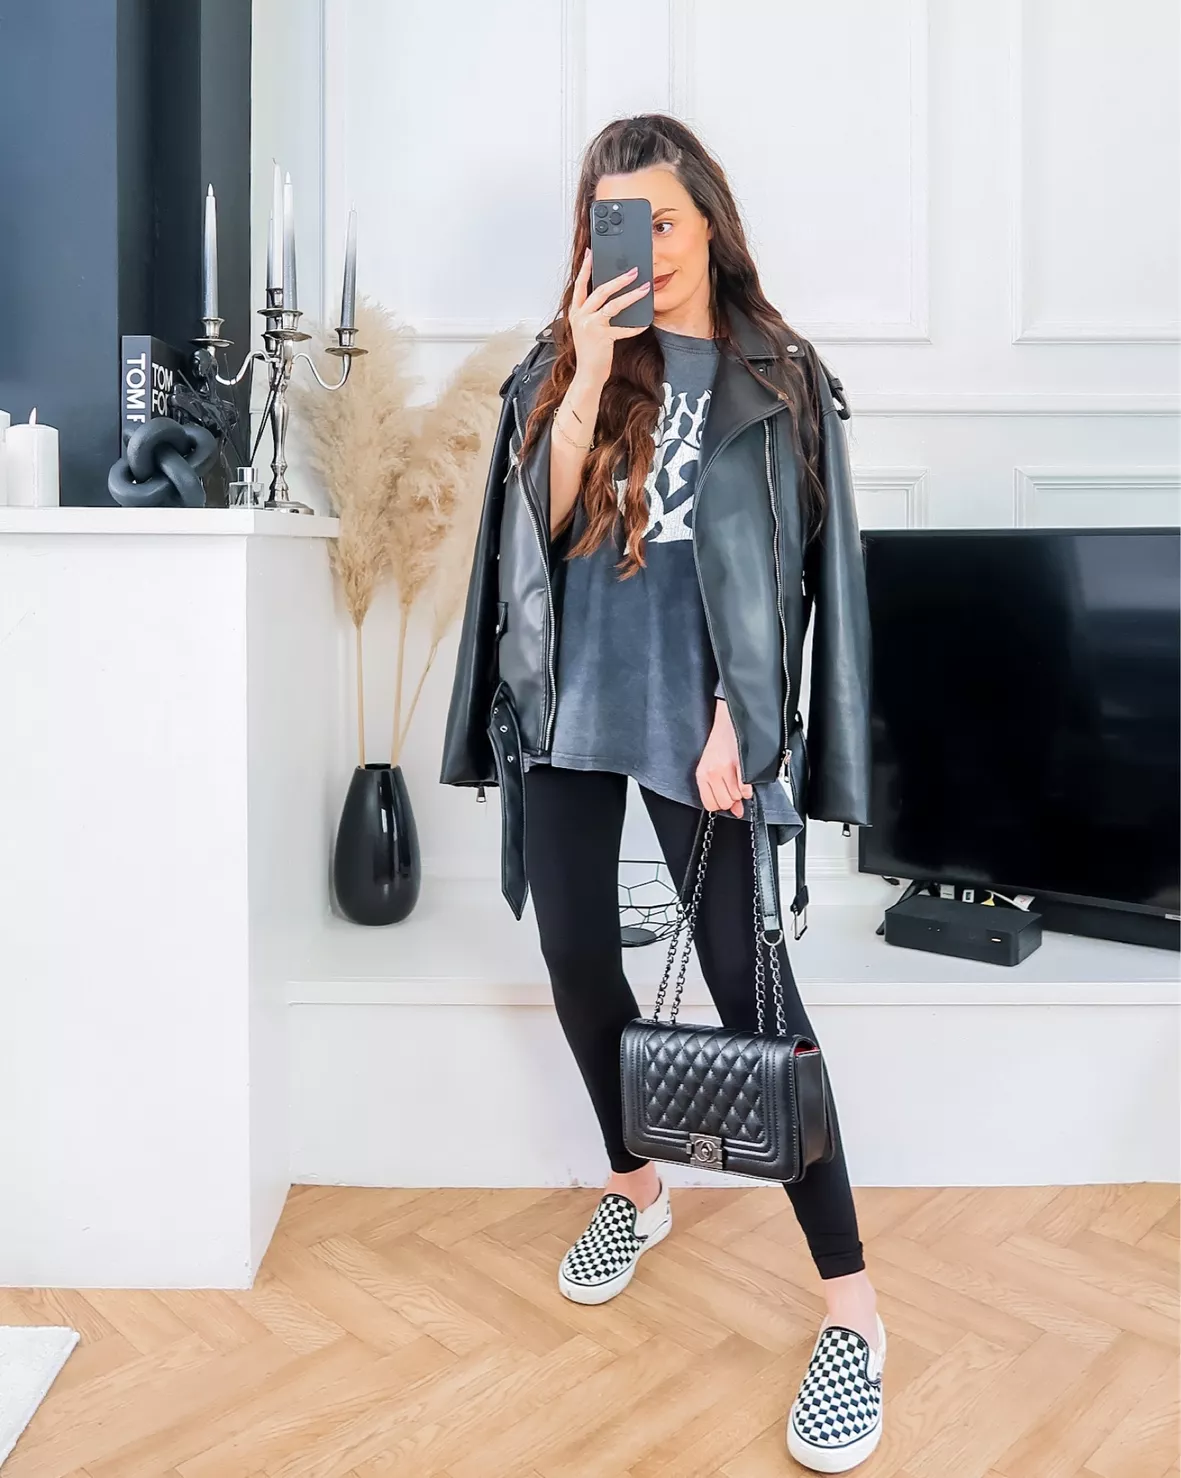 Chic and Casual Black Leggings Outfit Ideas